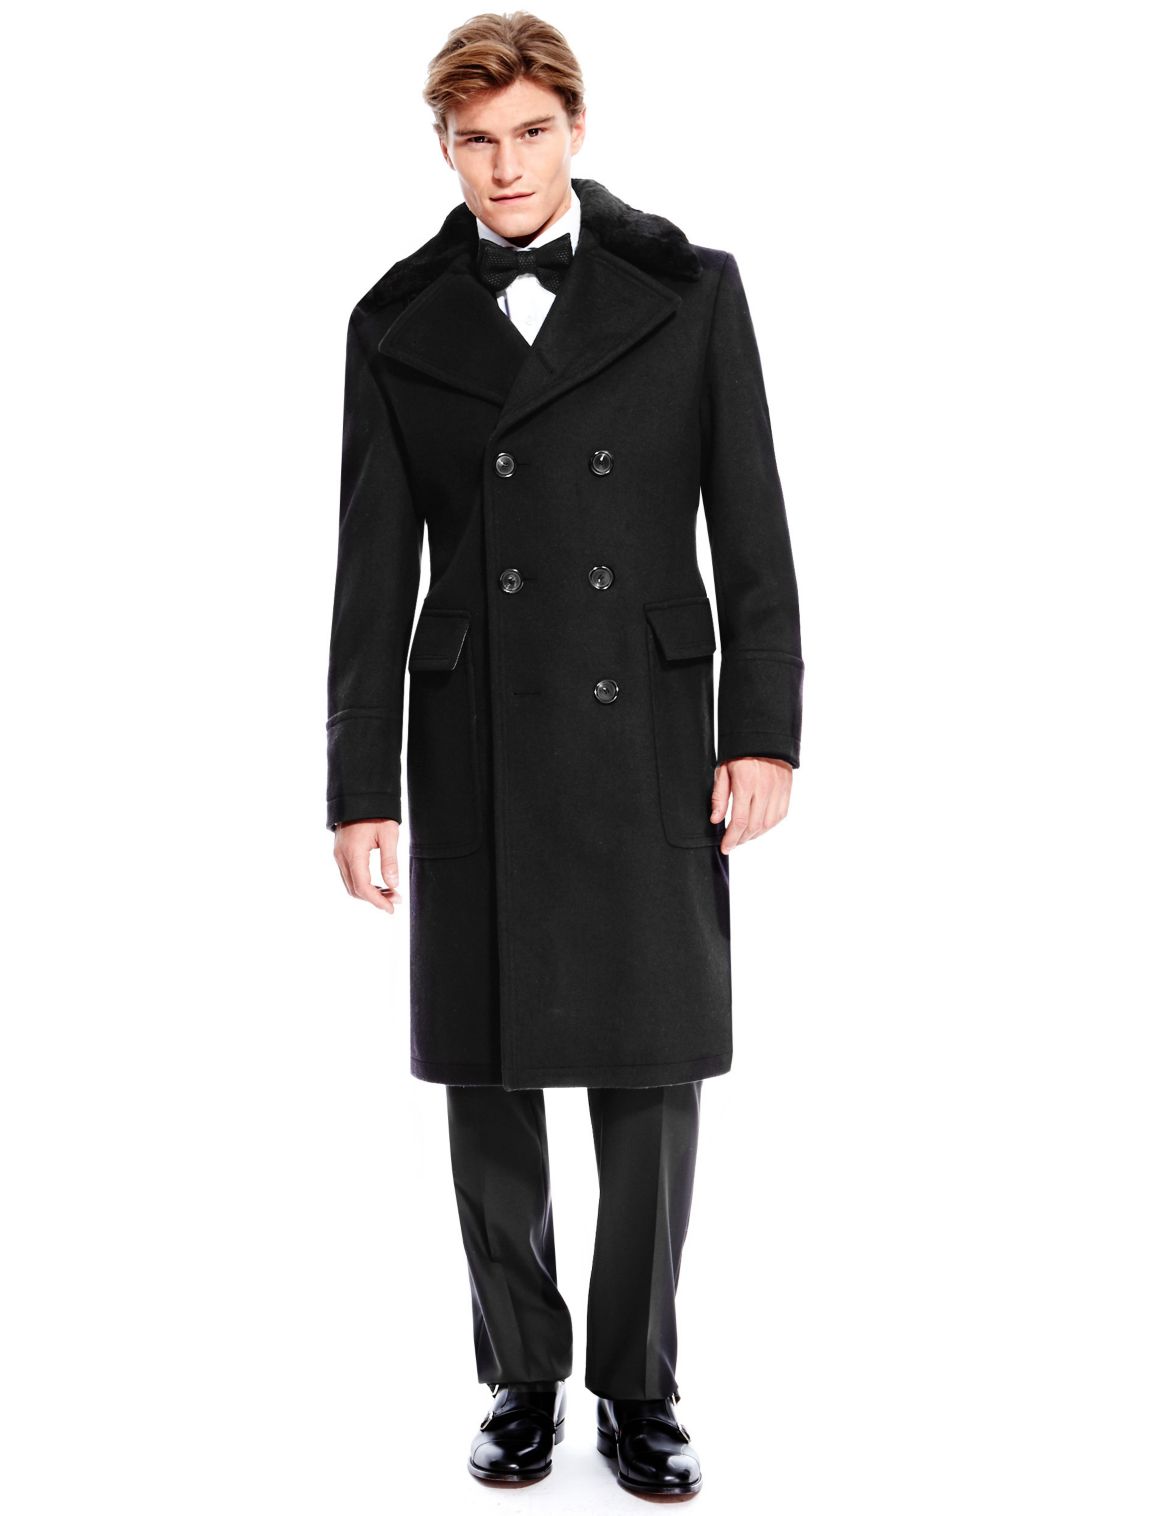 Best Of British Pure Wool Tailored Fit Double Breasted Coat Black ...